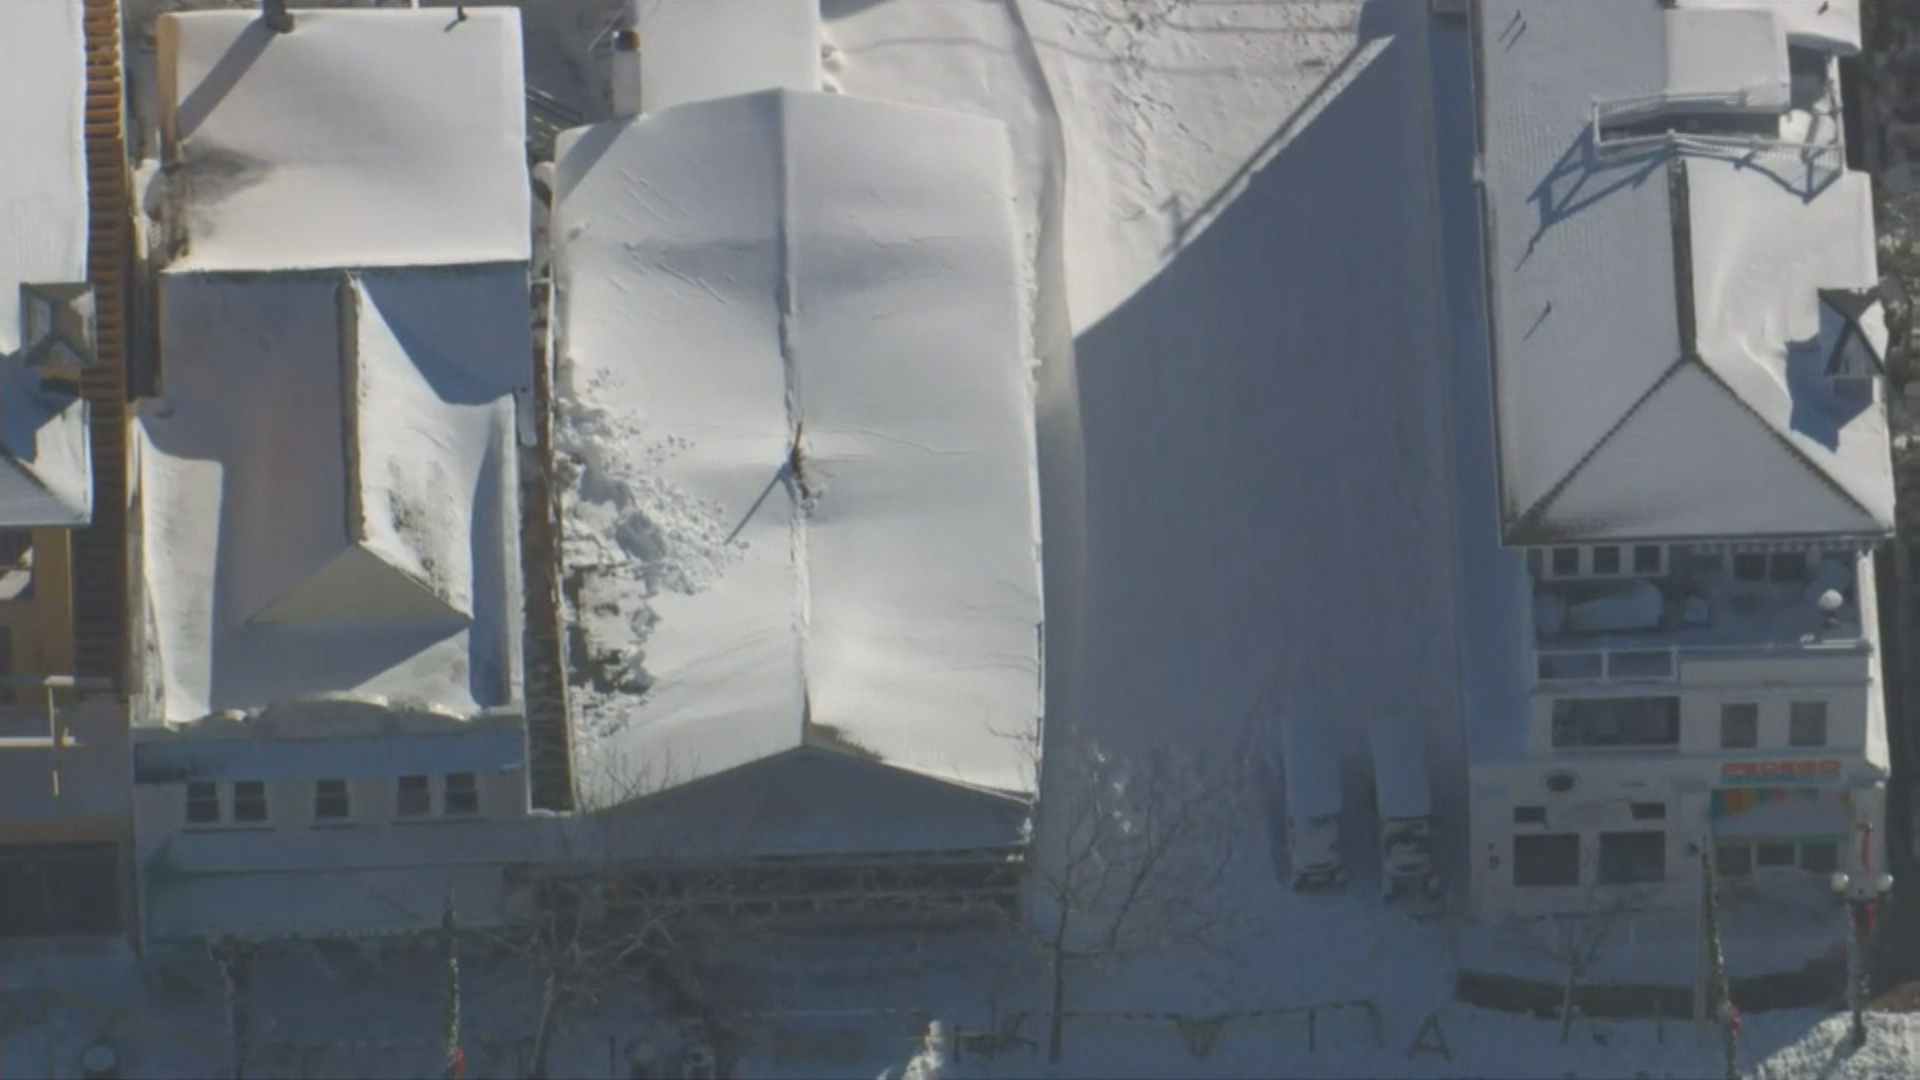 Snow Causes Roof To Collapse At GG's Diamond Cleaners In Ocean City, New Jersey